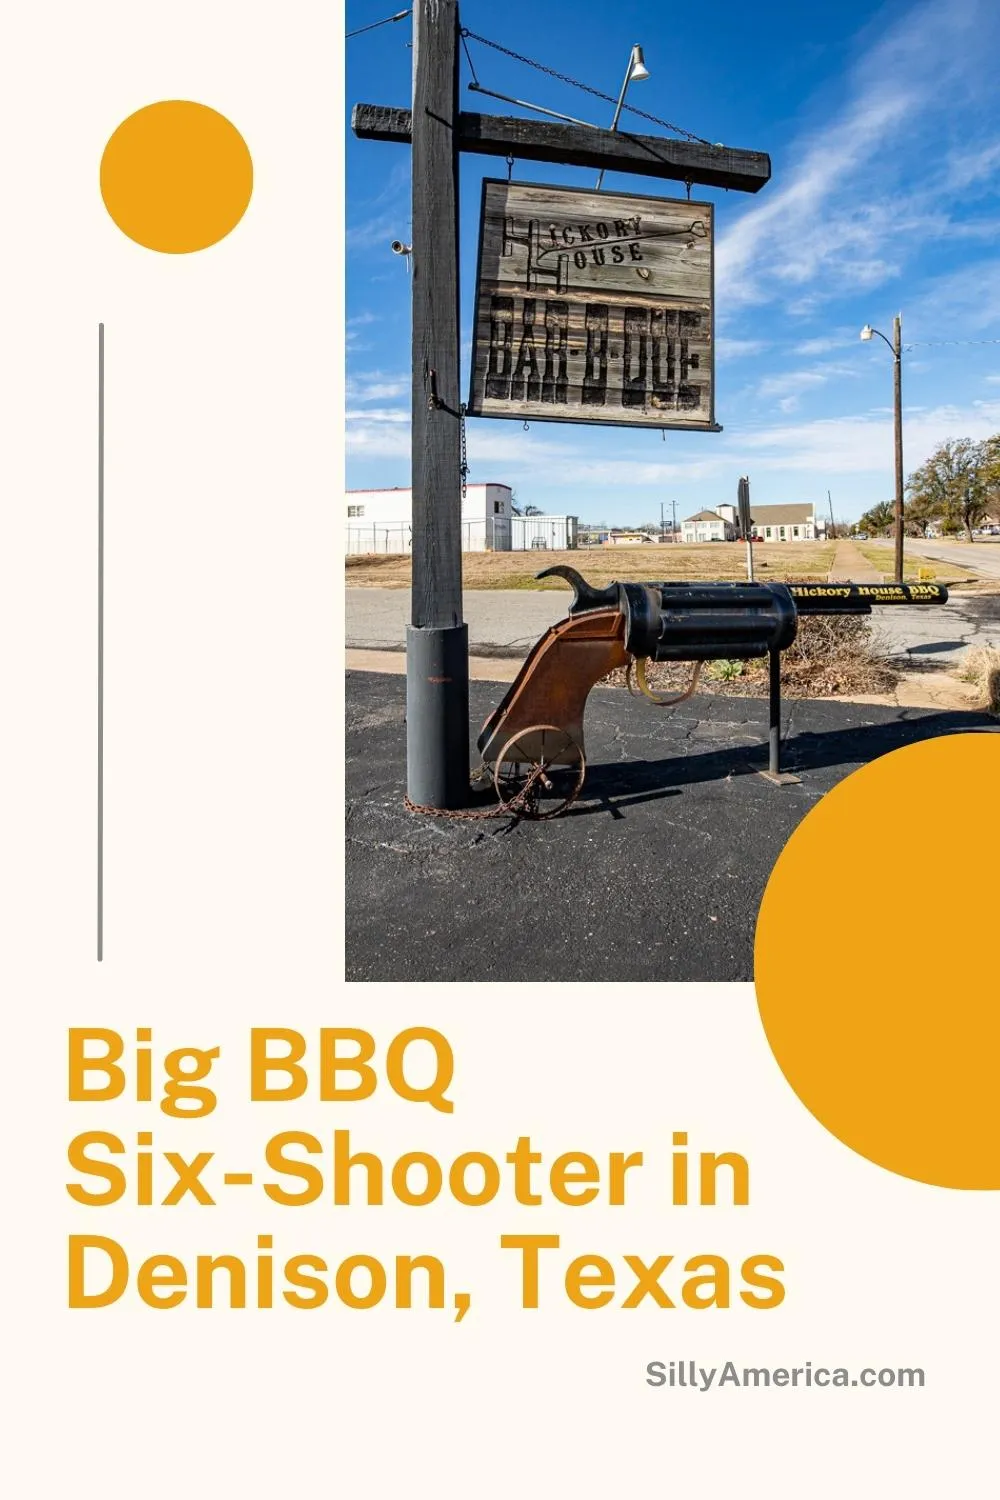 This roadside attraction is a smoking gun-literally. It's the Big BBQ Six-Shooter in Denison, Texas. Talk about bringing out the big guns! Visit this local roadside attraction on your next Texas road trip. Add it to your travel itinerary! #RoadTrip #texasRoadTrip #FortWorth #FortWorthTexas #FortWorthAttractions #FortWorthTexasAttractions #RoadsideAttraction #RoadsideAttractions #TexasRoadsideAttraction #TexasRoadsideAttractions